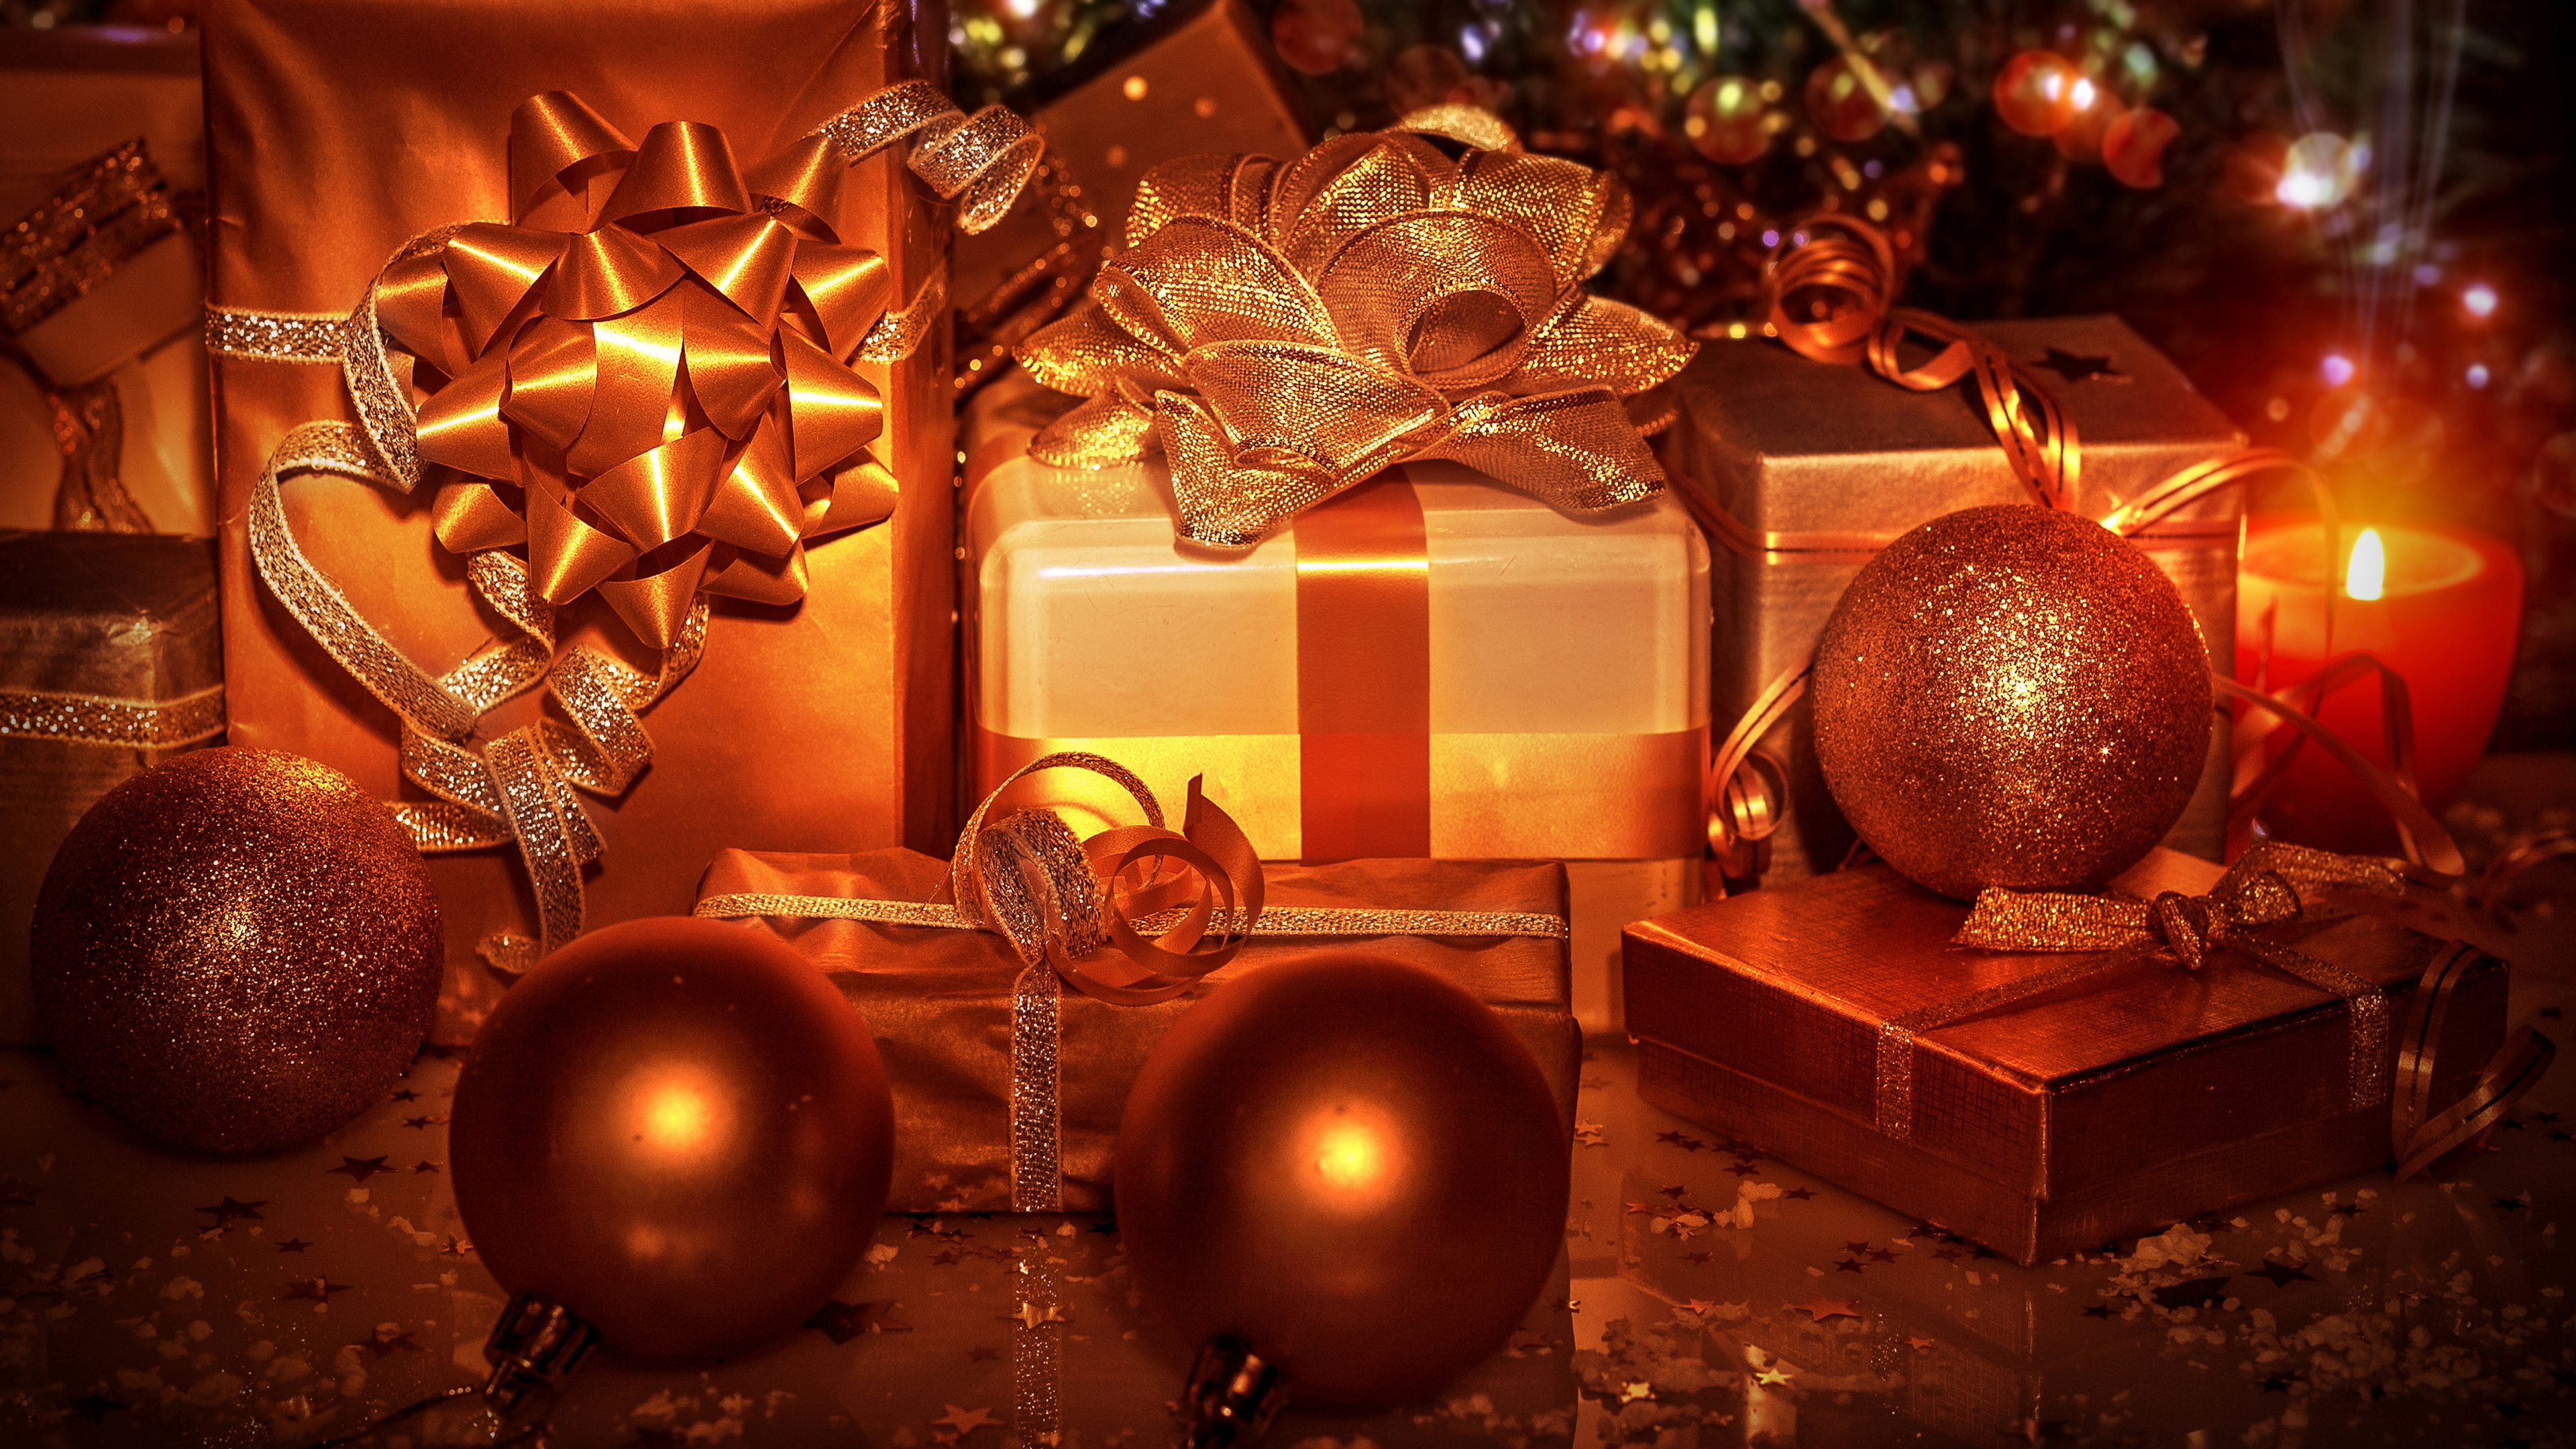 Christmas Day, Christmas Ornament, Christmas Tree, New Year, Christmas Decoration. Wallpaper in 3840x2160 Resolution